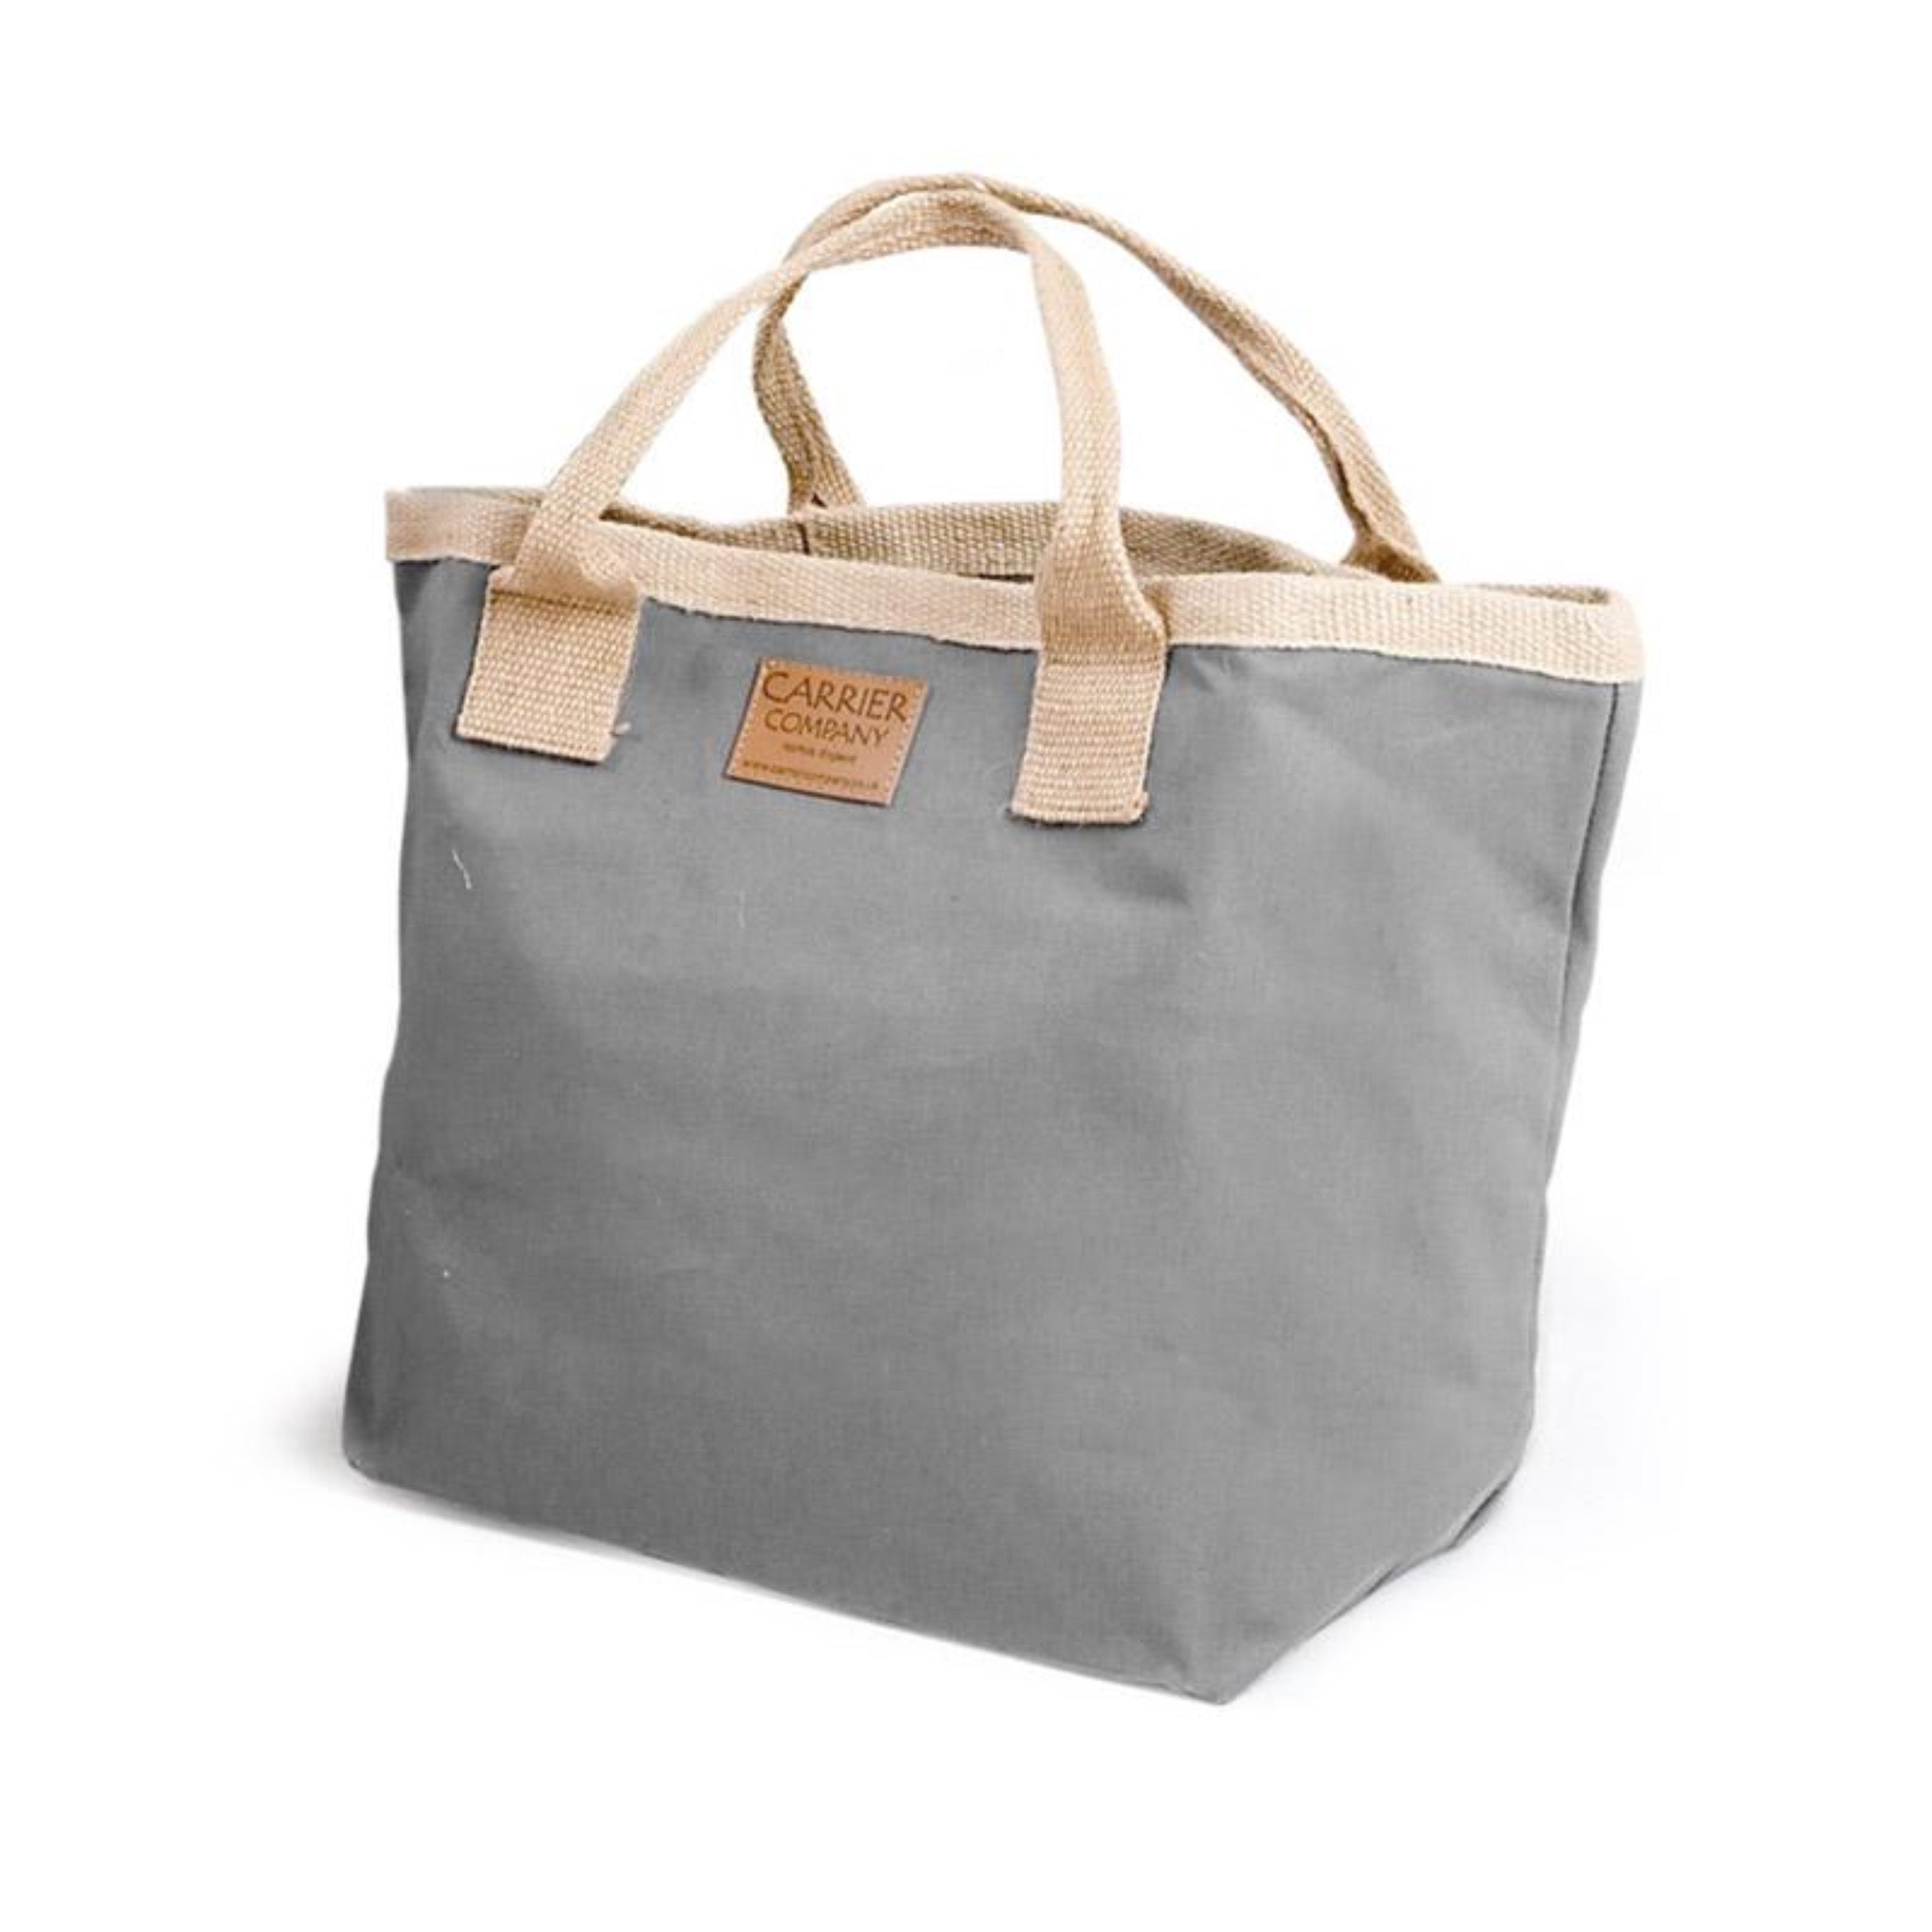 Carrier Company Sturdy Bag in Dove Grey